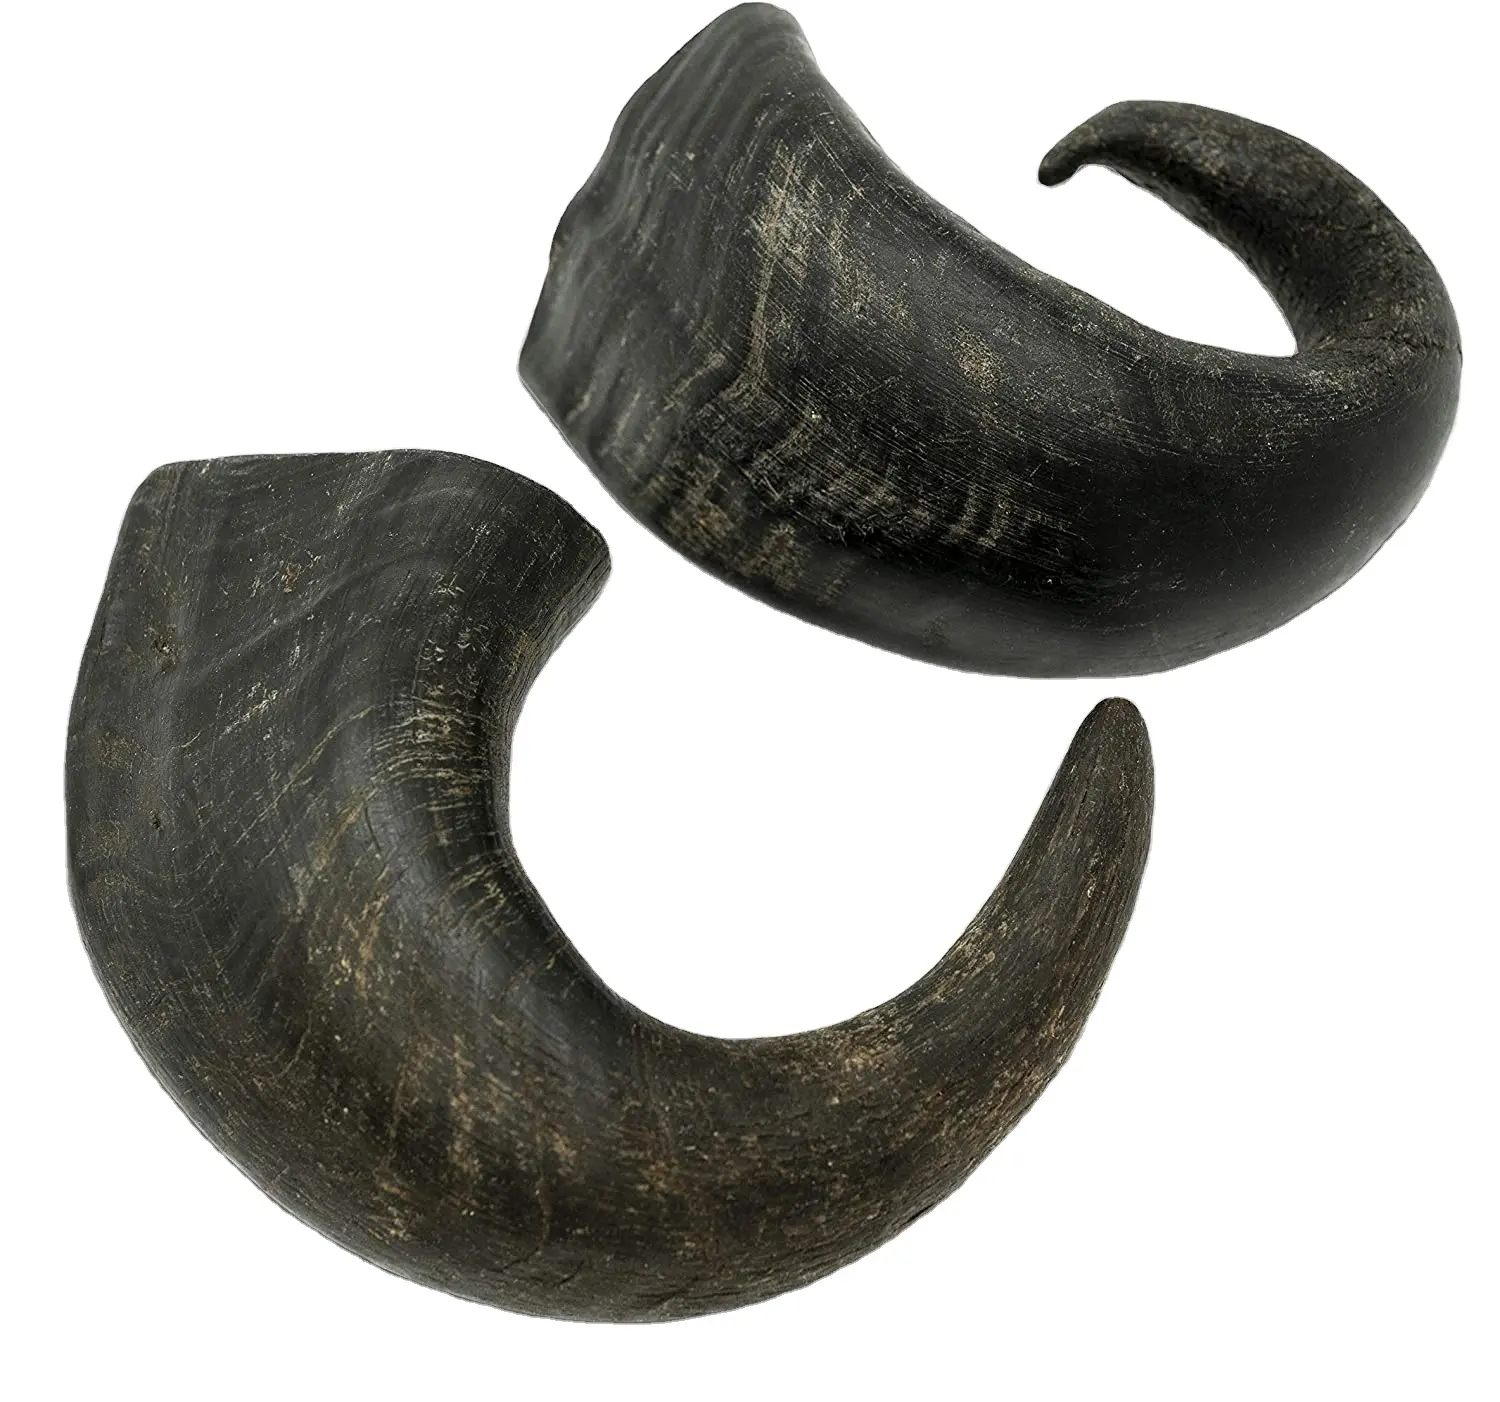 BEST QUALITY WATER BUFFALO HORN PET FOOD FOR DOG CHEW